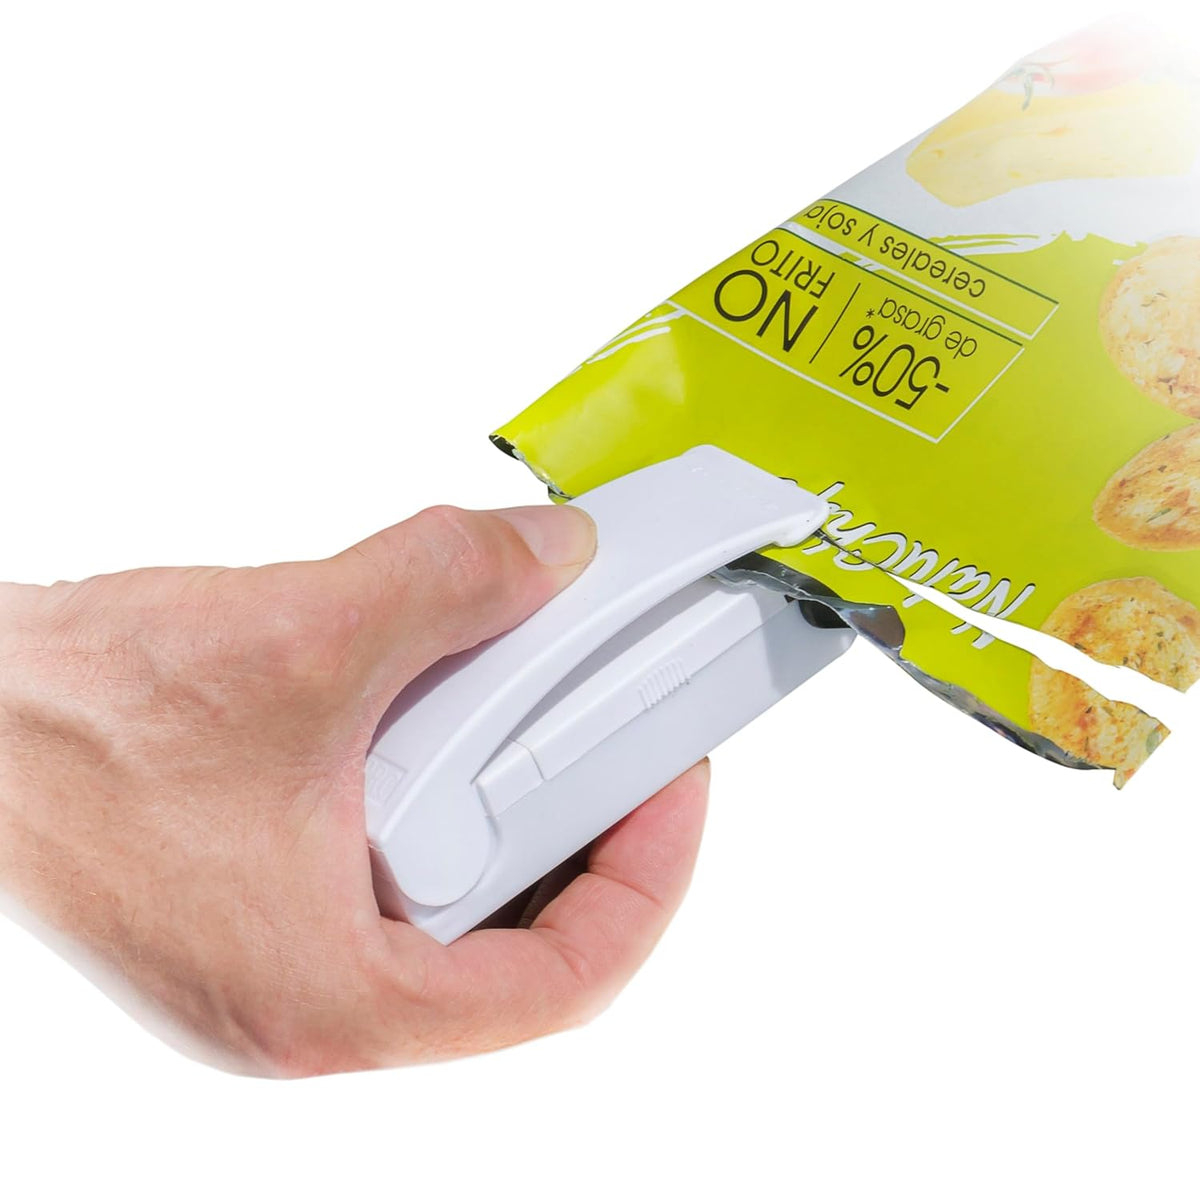 Innovagoods Magseal Magnet Bag Sealer - White | 821562 from Innovagoods - DID Electrical